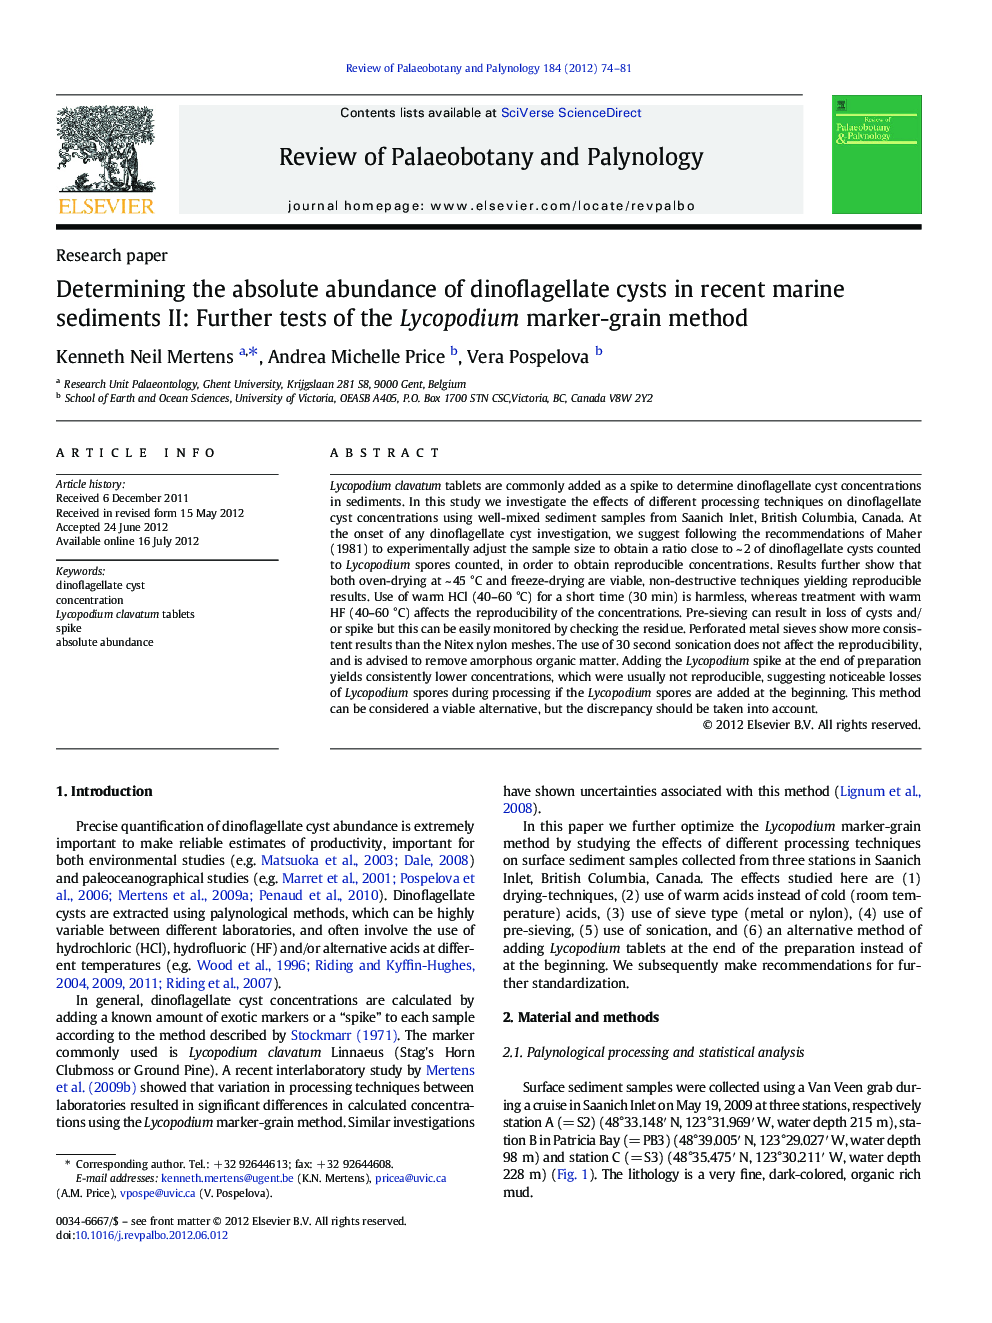 Determining the absolute abundance of dinoflagellate cysts in recent marine sediments II: Further tests of the Lycopodium marker-grain method